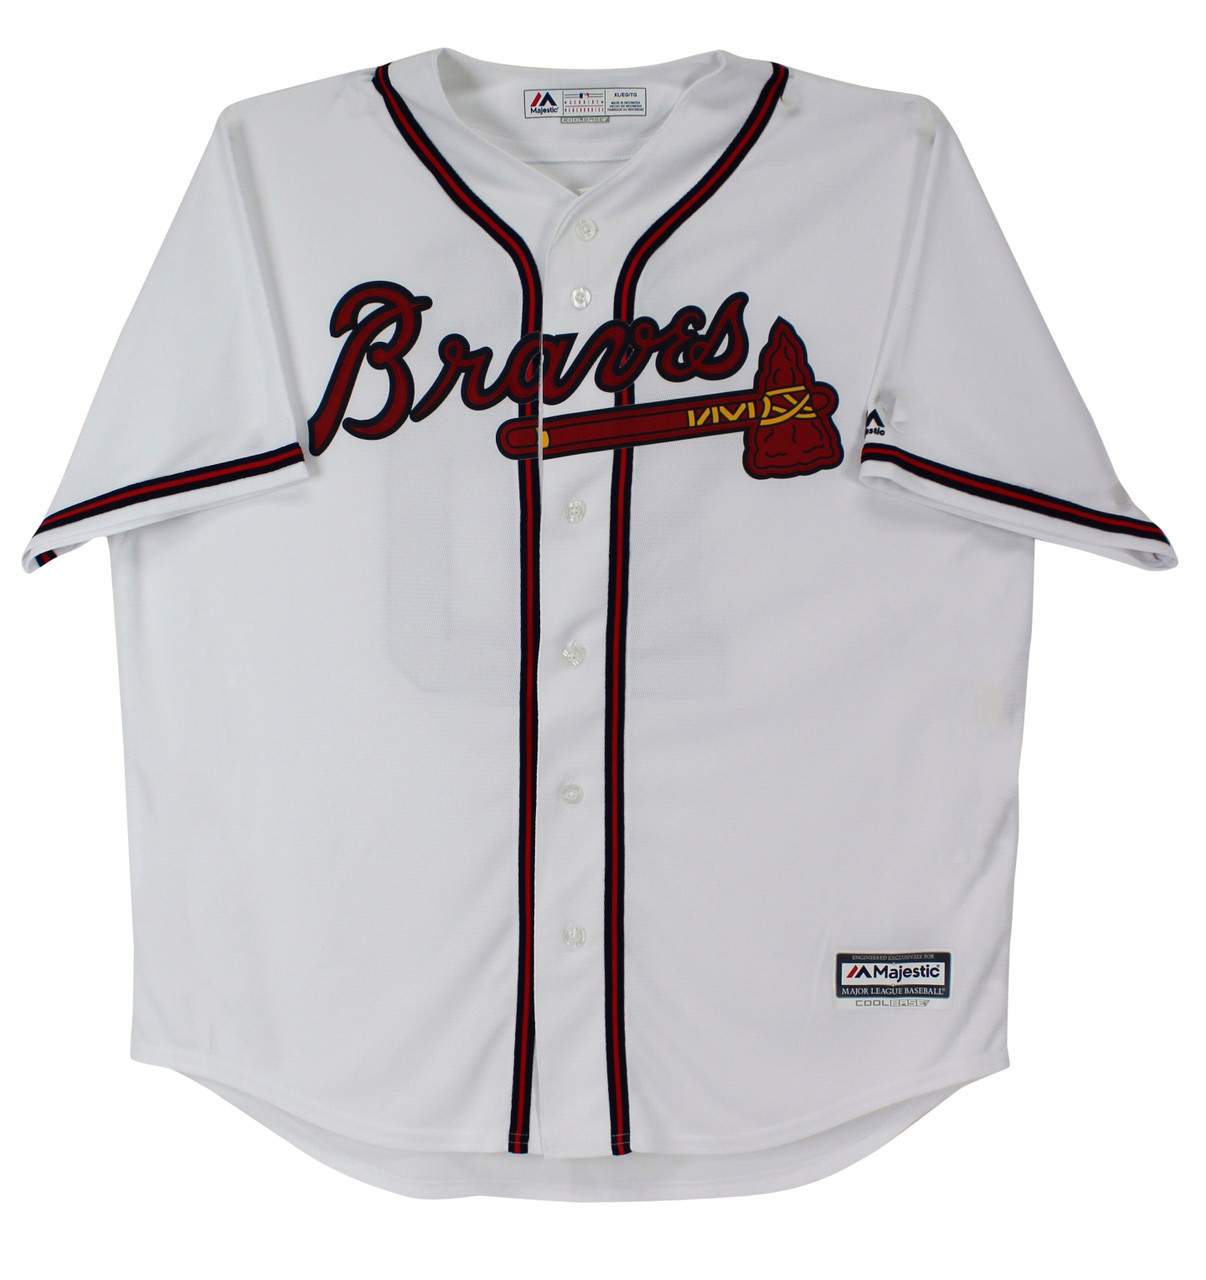 Press Pass Collectibles Braves Chipper Jones HOF 18 Authentic Signed White Majestic CoolBase Jersey BAS